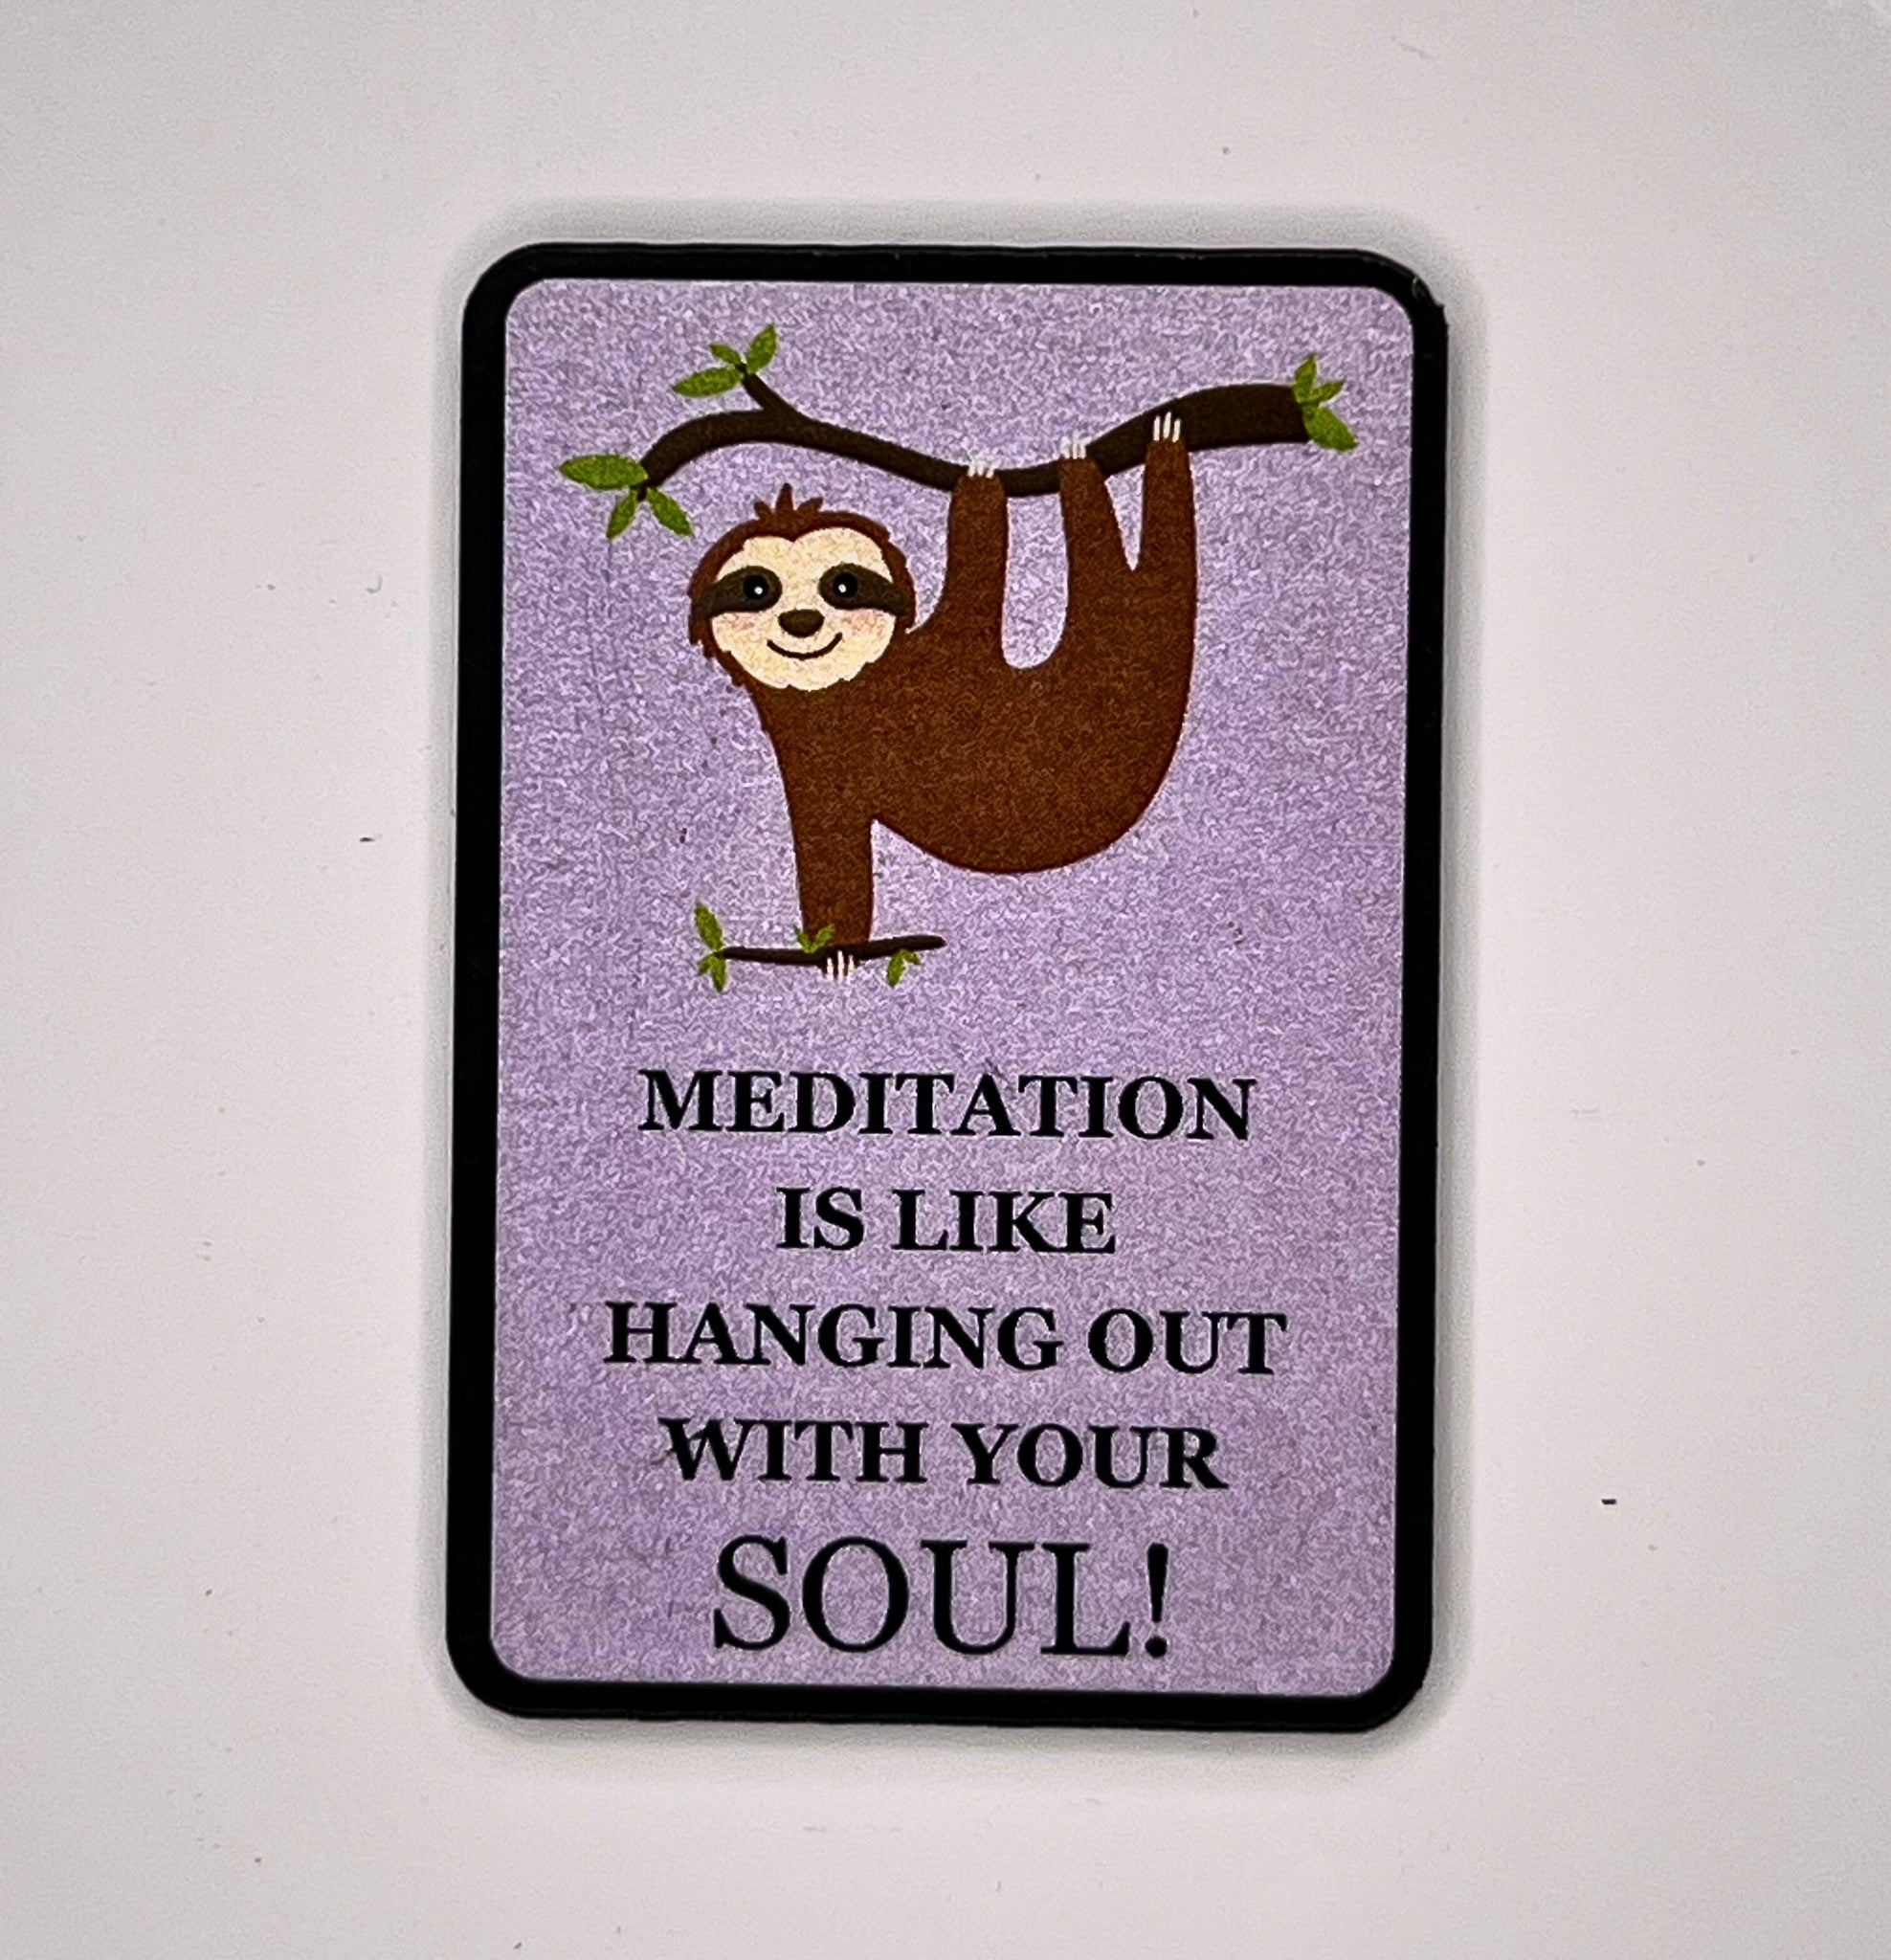 FRIDGE MAGNETS MDF WHITEBOARD MAGNETS YOGA FUNNY QUOTES - SET OF 6